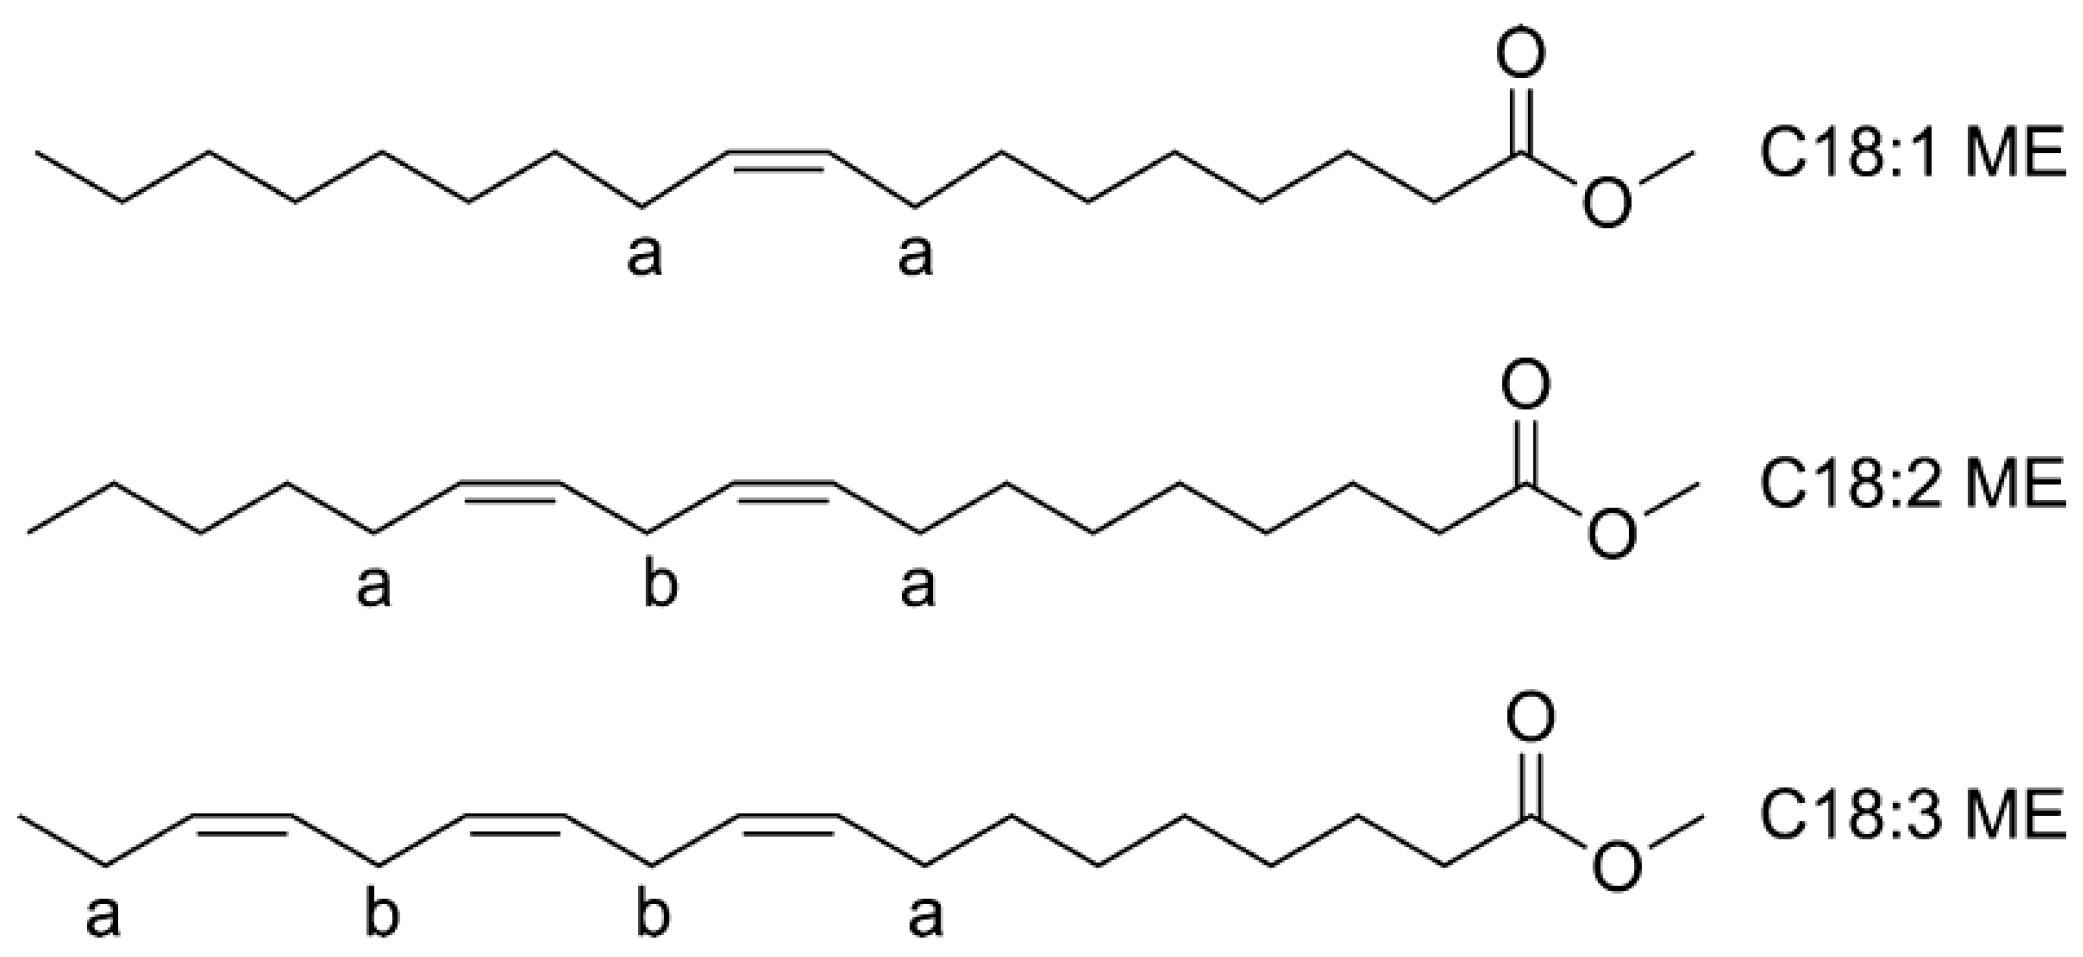 Mark Distillate fuel Blends of some Distillate fuel with the fatty acid methyl ester.